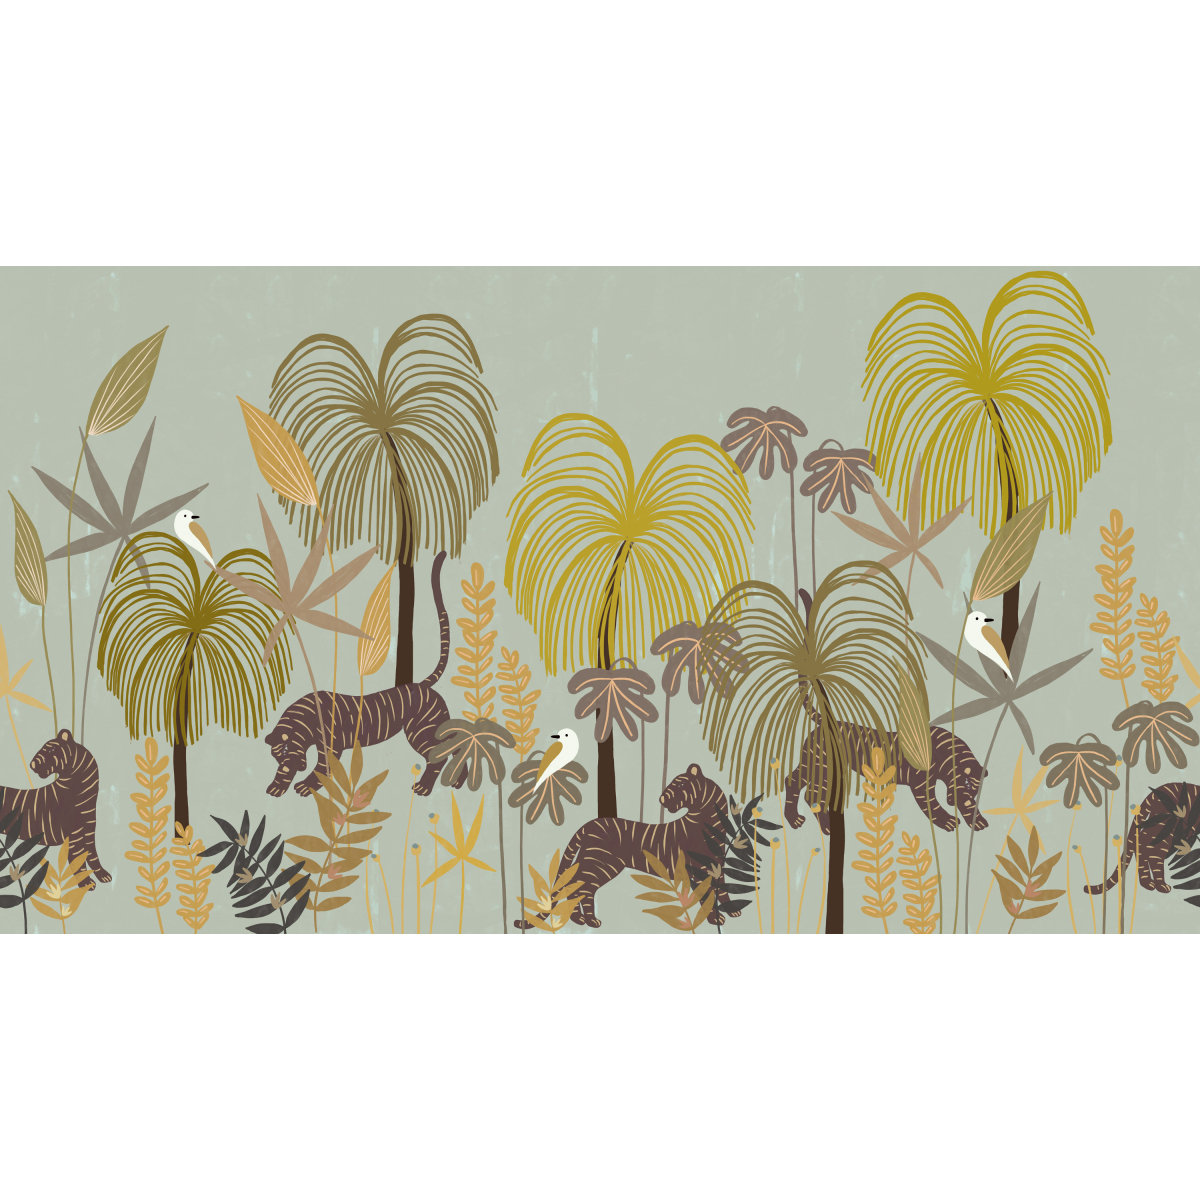 Panoramic wallpaper tigers in the colorful tropical jungle - Zoé Jiquel Collection - Acte-Deco